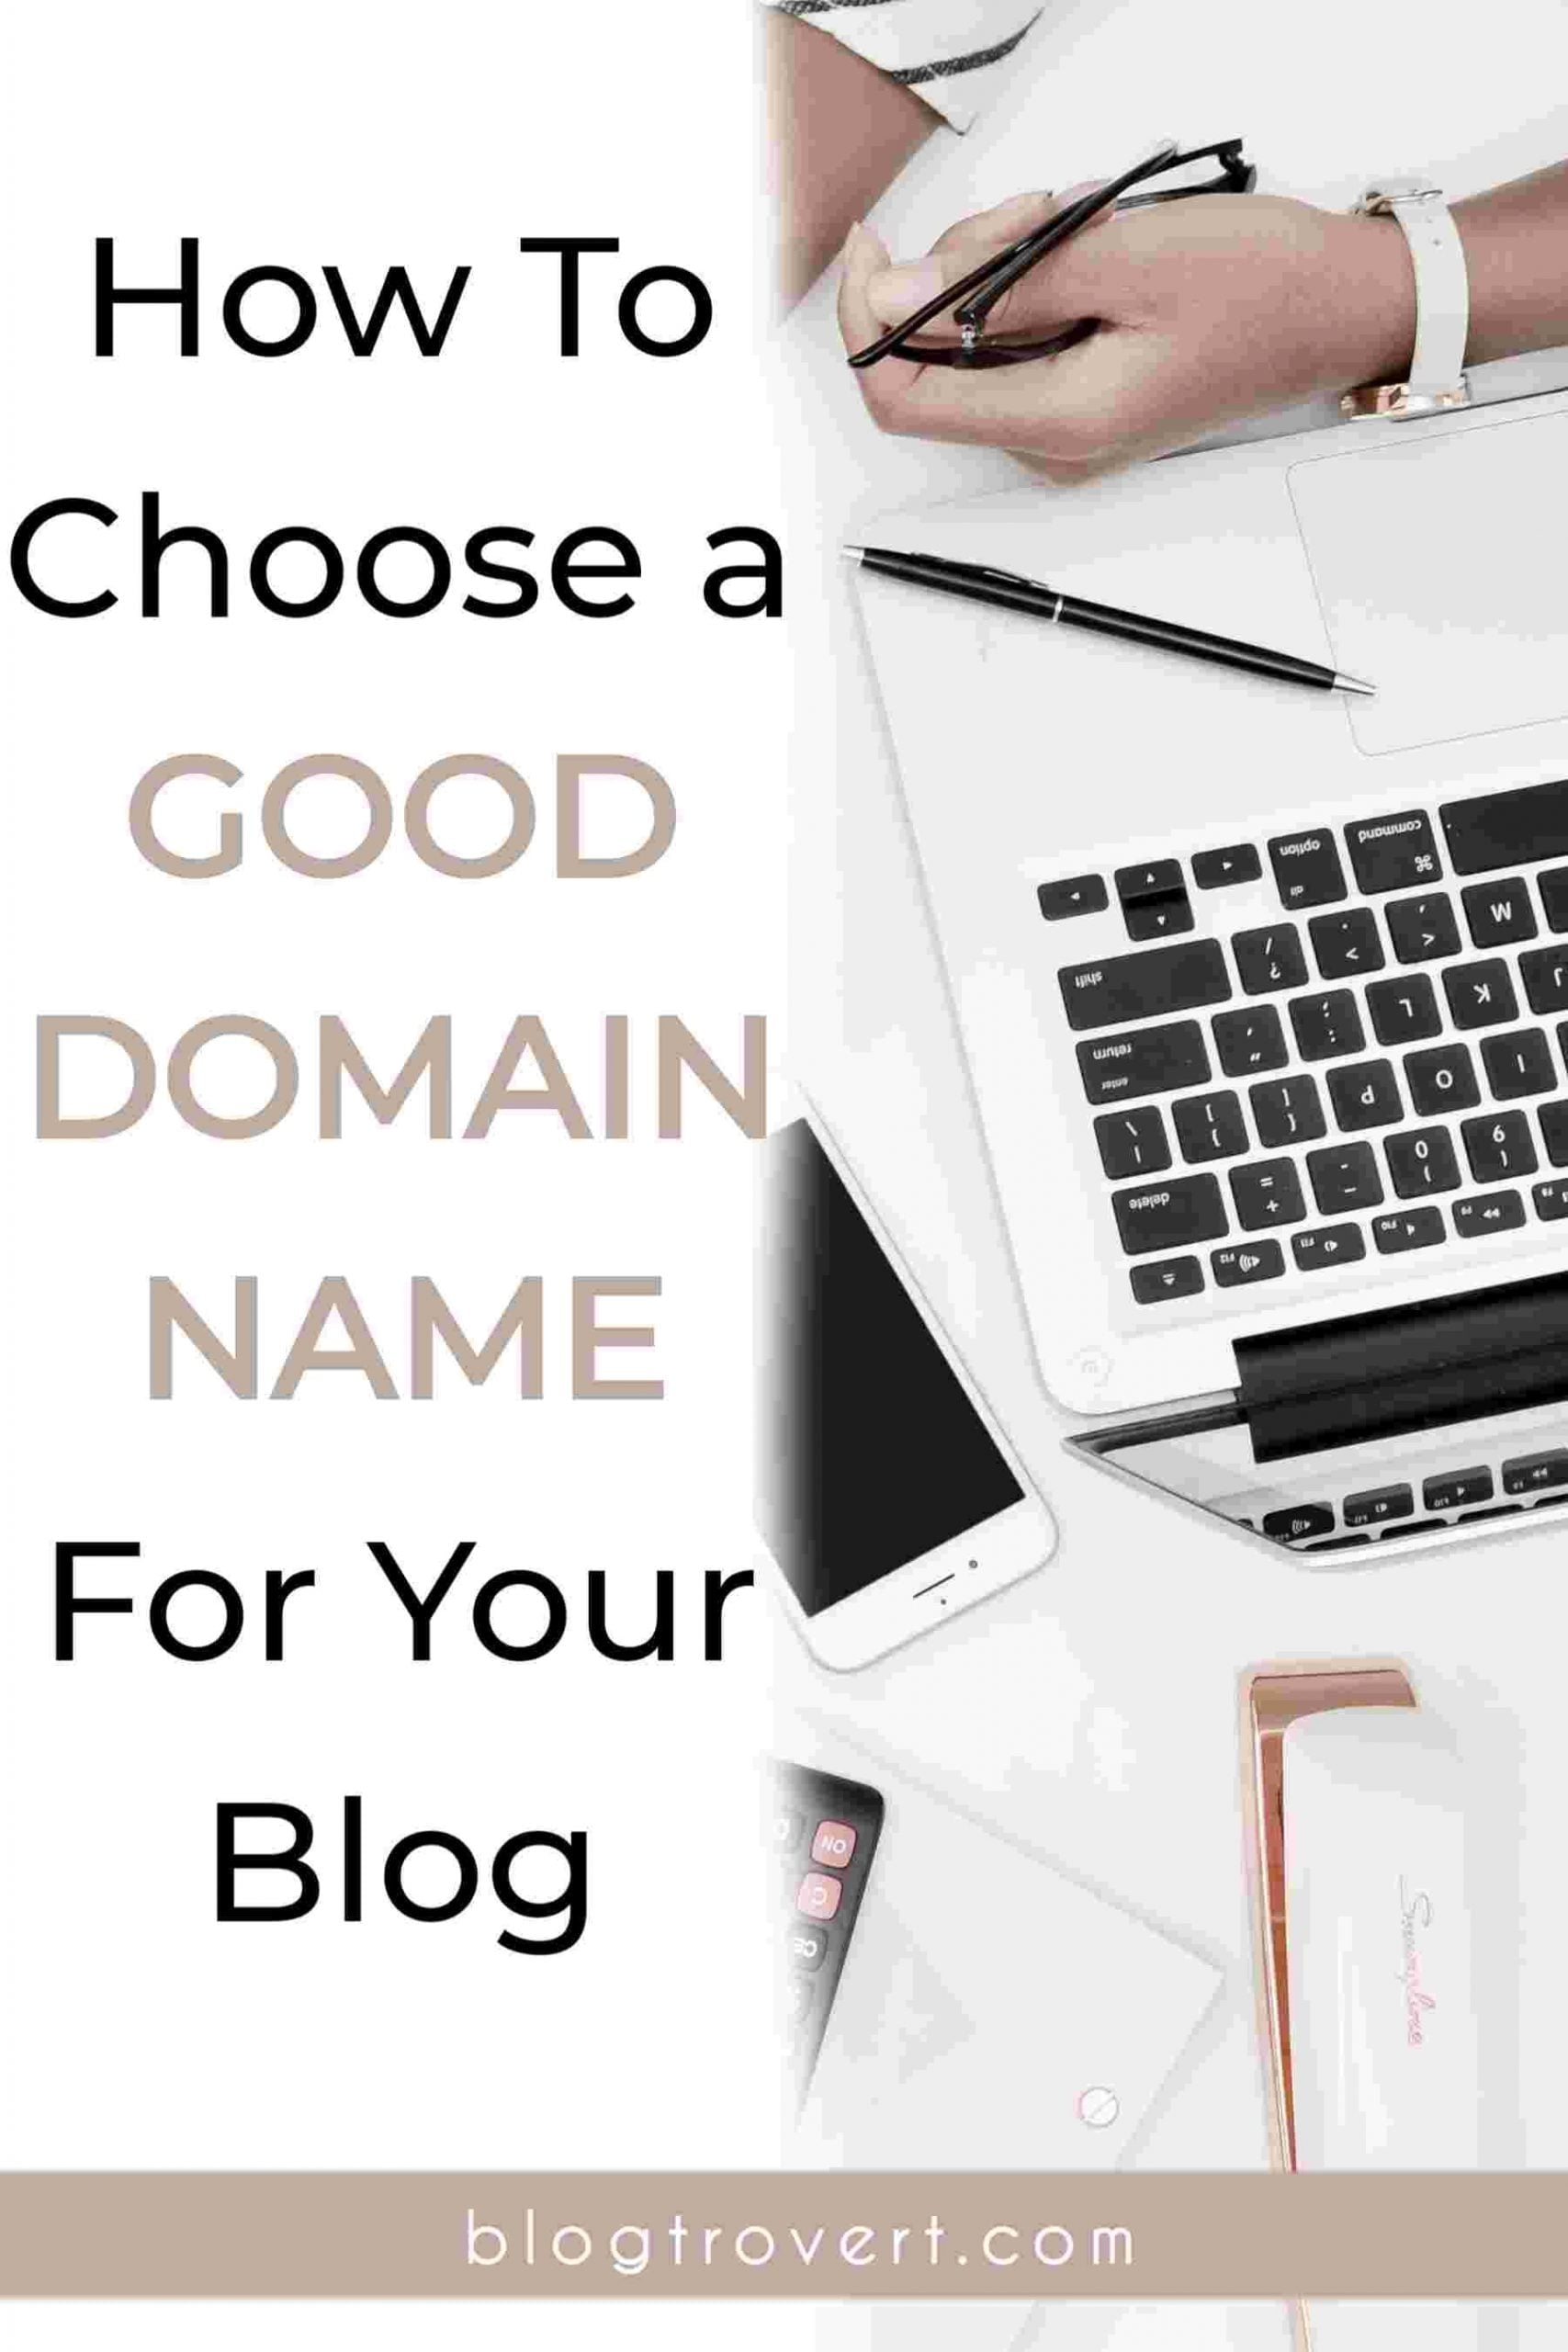 How To Choose a Good Domain Name For Your Blog; 13 Essential Tips 4